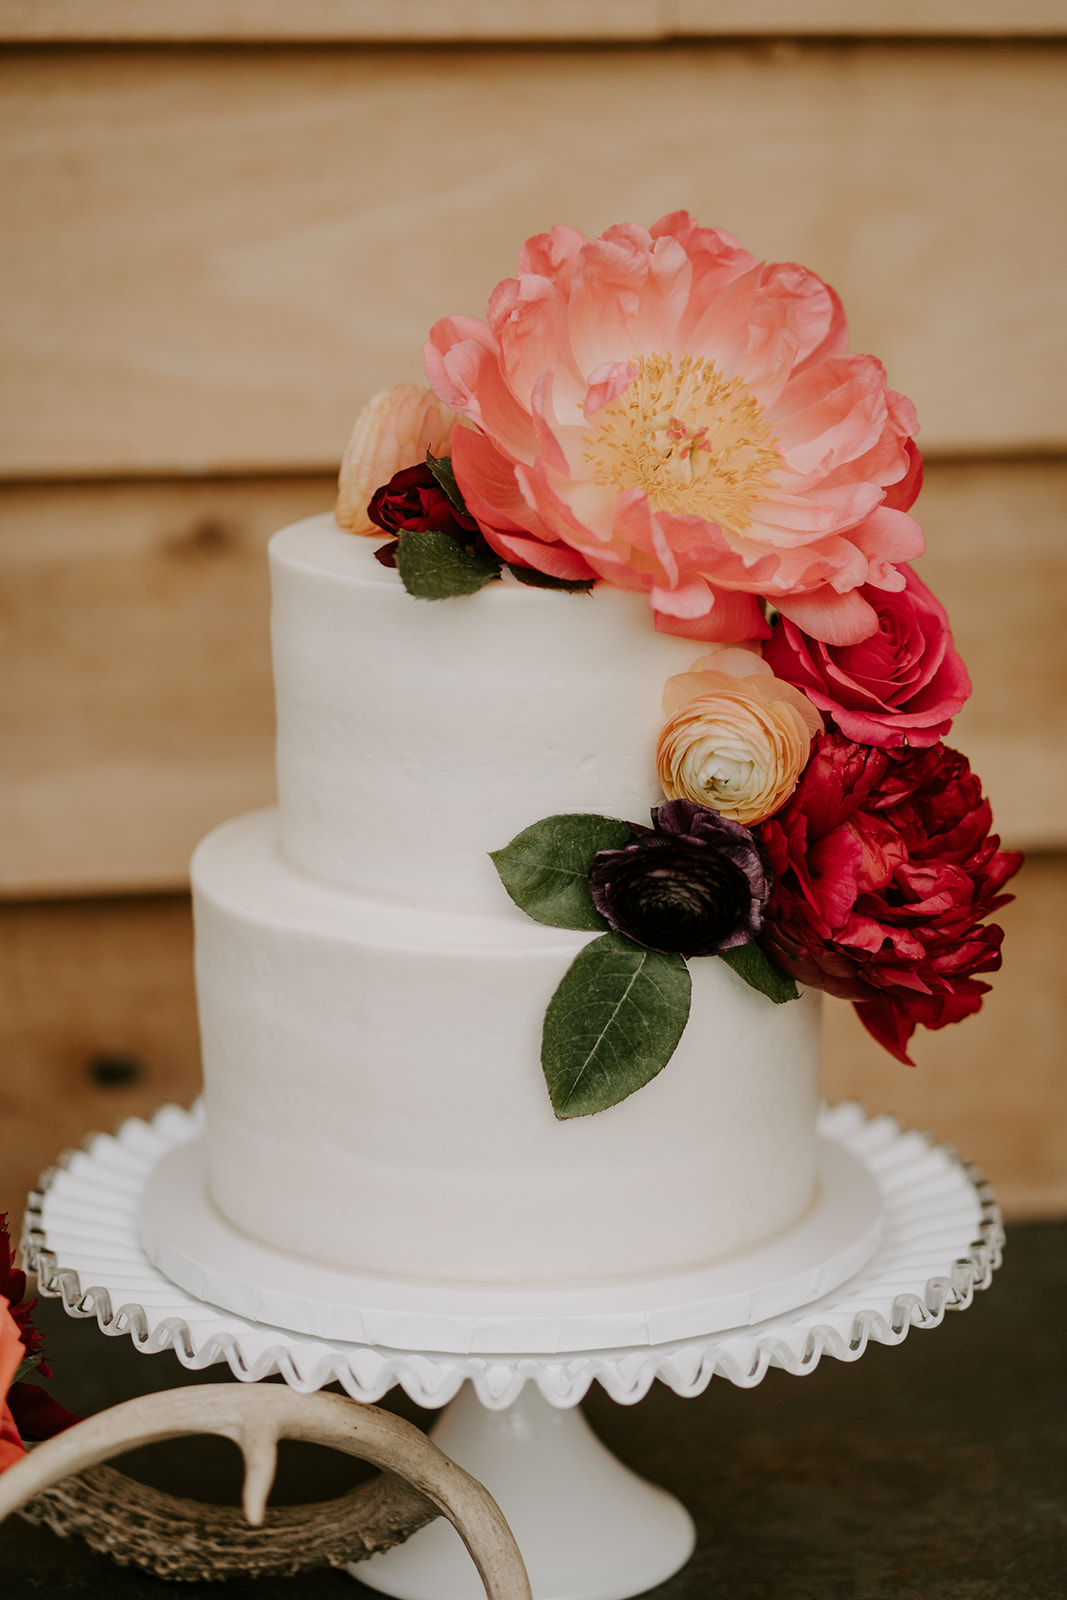 White wedding cake with pink and red flowers